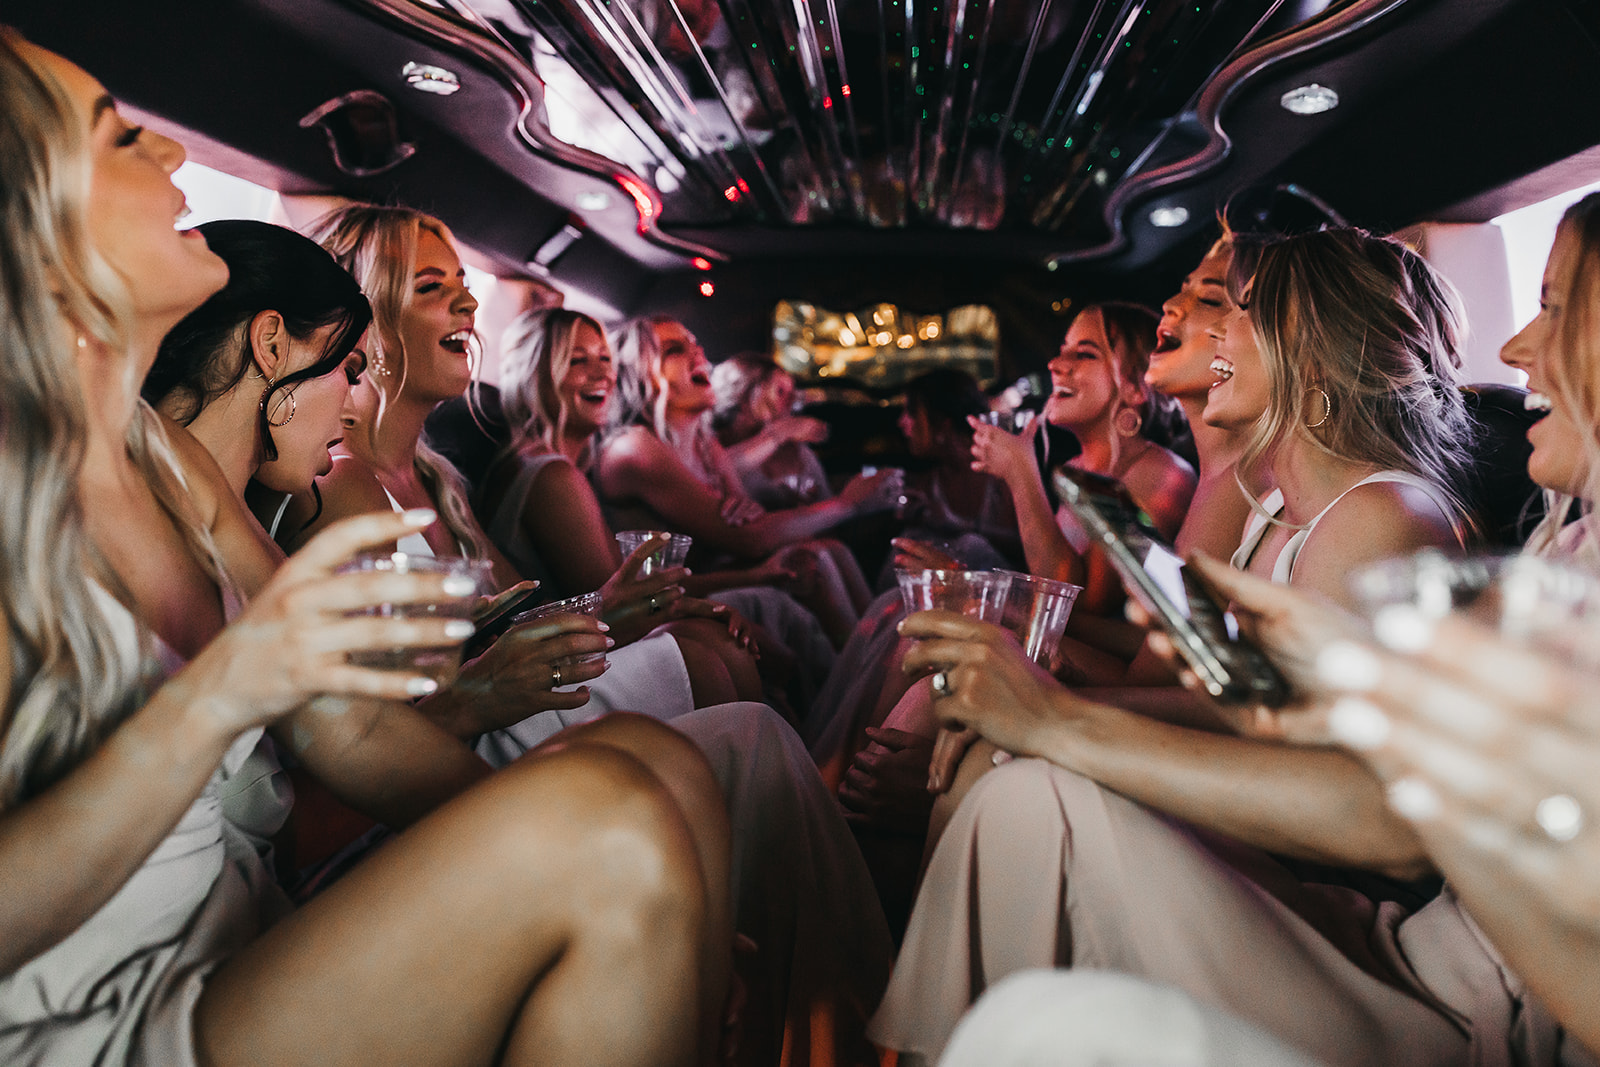 Bride and bridesmaids having fun in the limo ride to the wedding at Cooper Wine Company winery in Washington